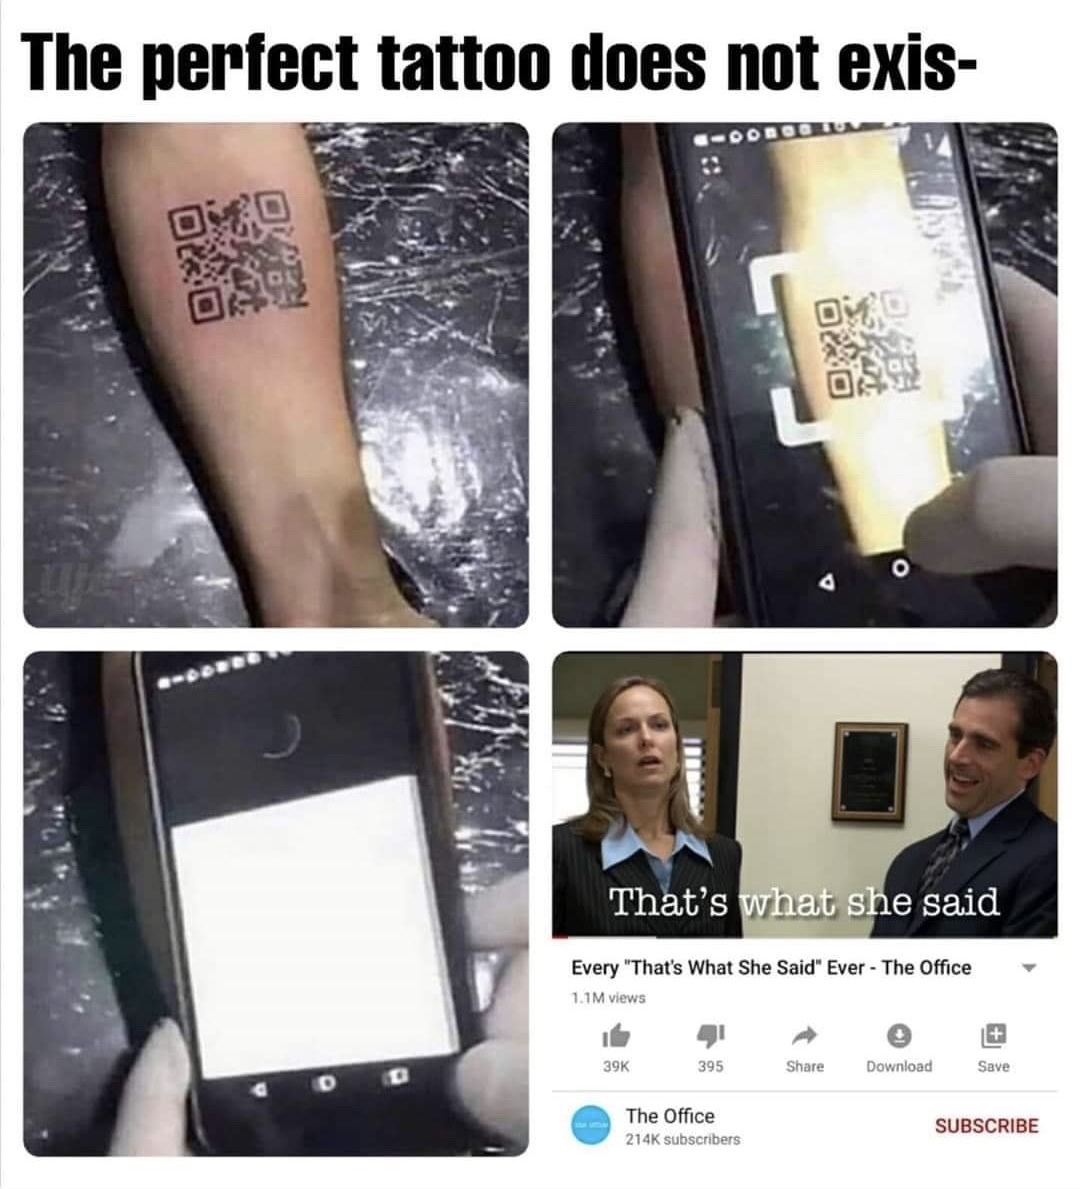 The perfect tattoo does not exis ke That's what she said Every "That's What She Said" Ever The Office 1.1M views 39K 395 Download Save The Office subscribers Subscribe